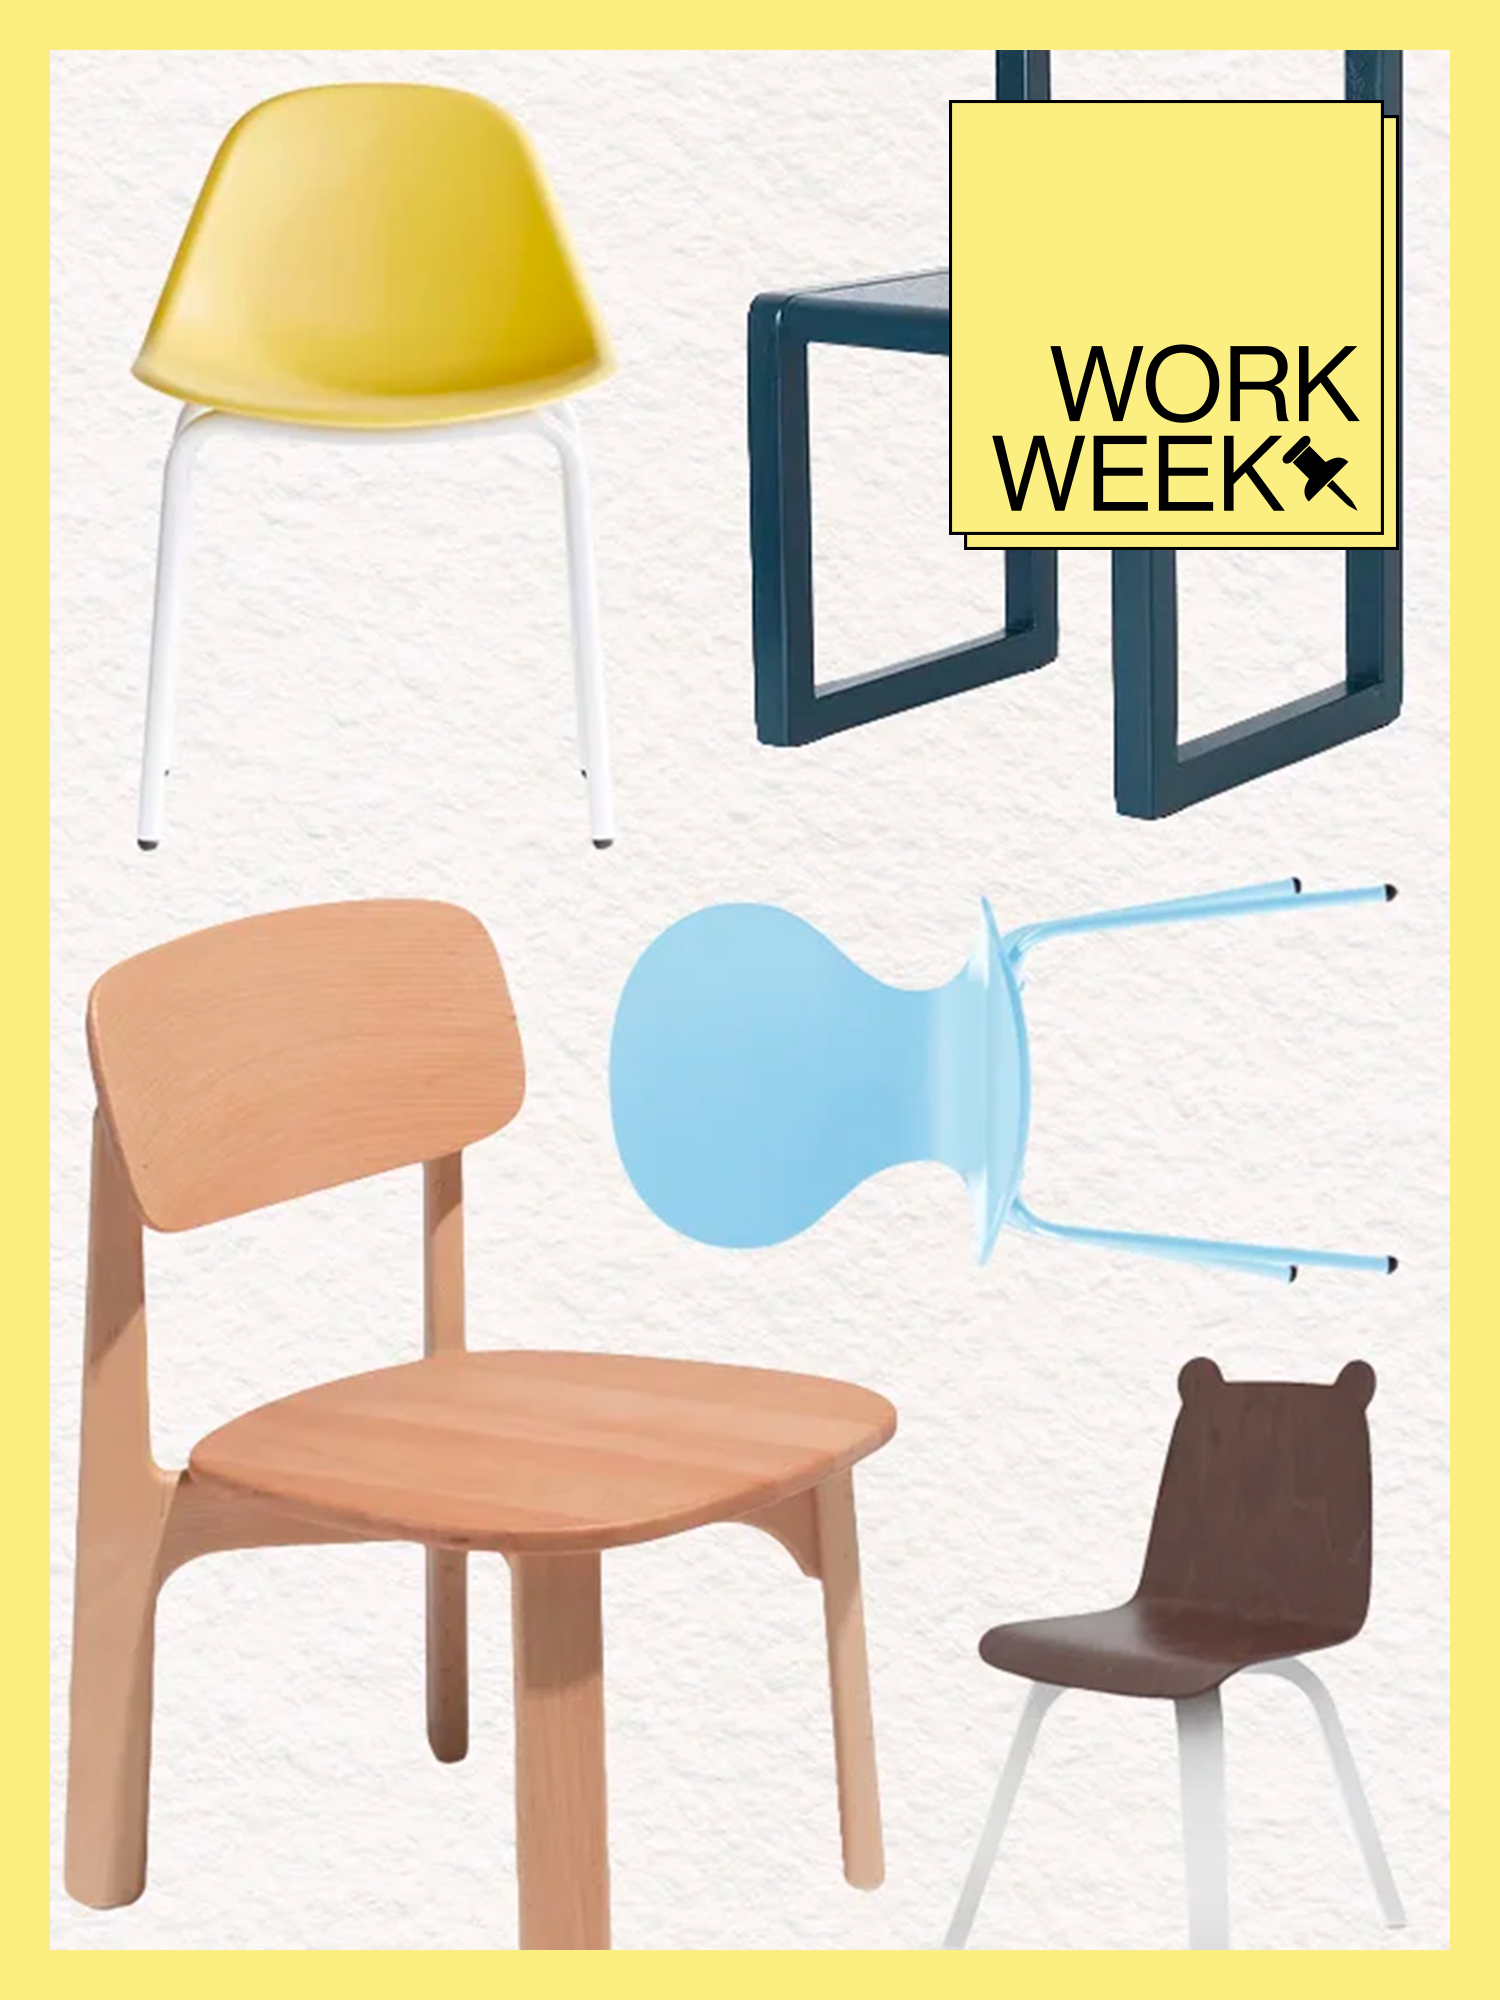 Kids desk chair collage with yellow Work Week design border and badge.